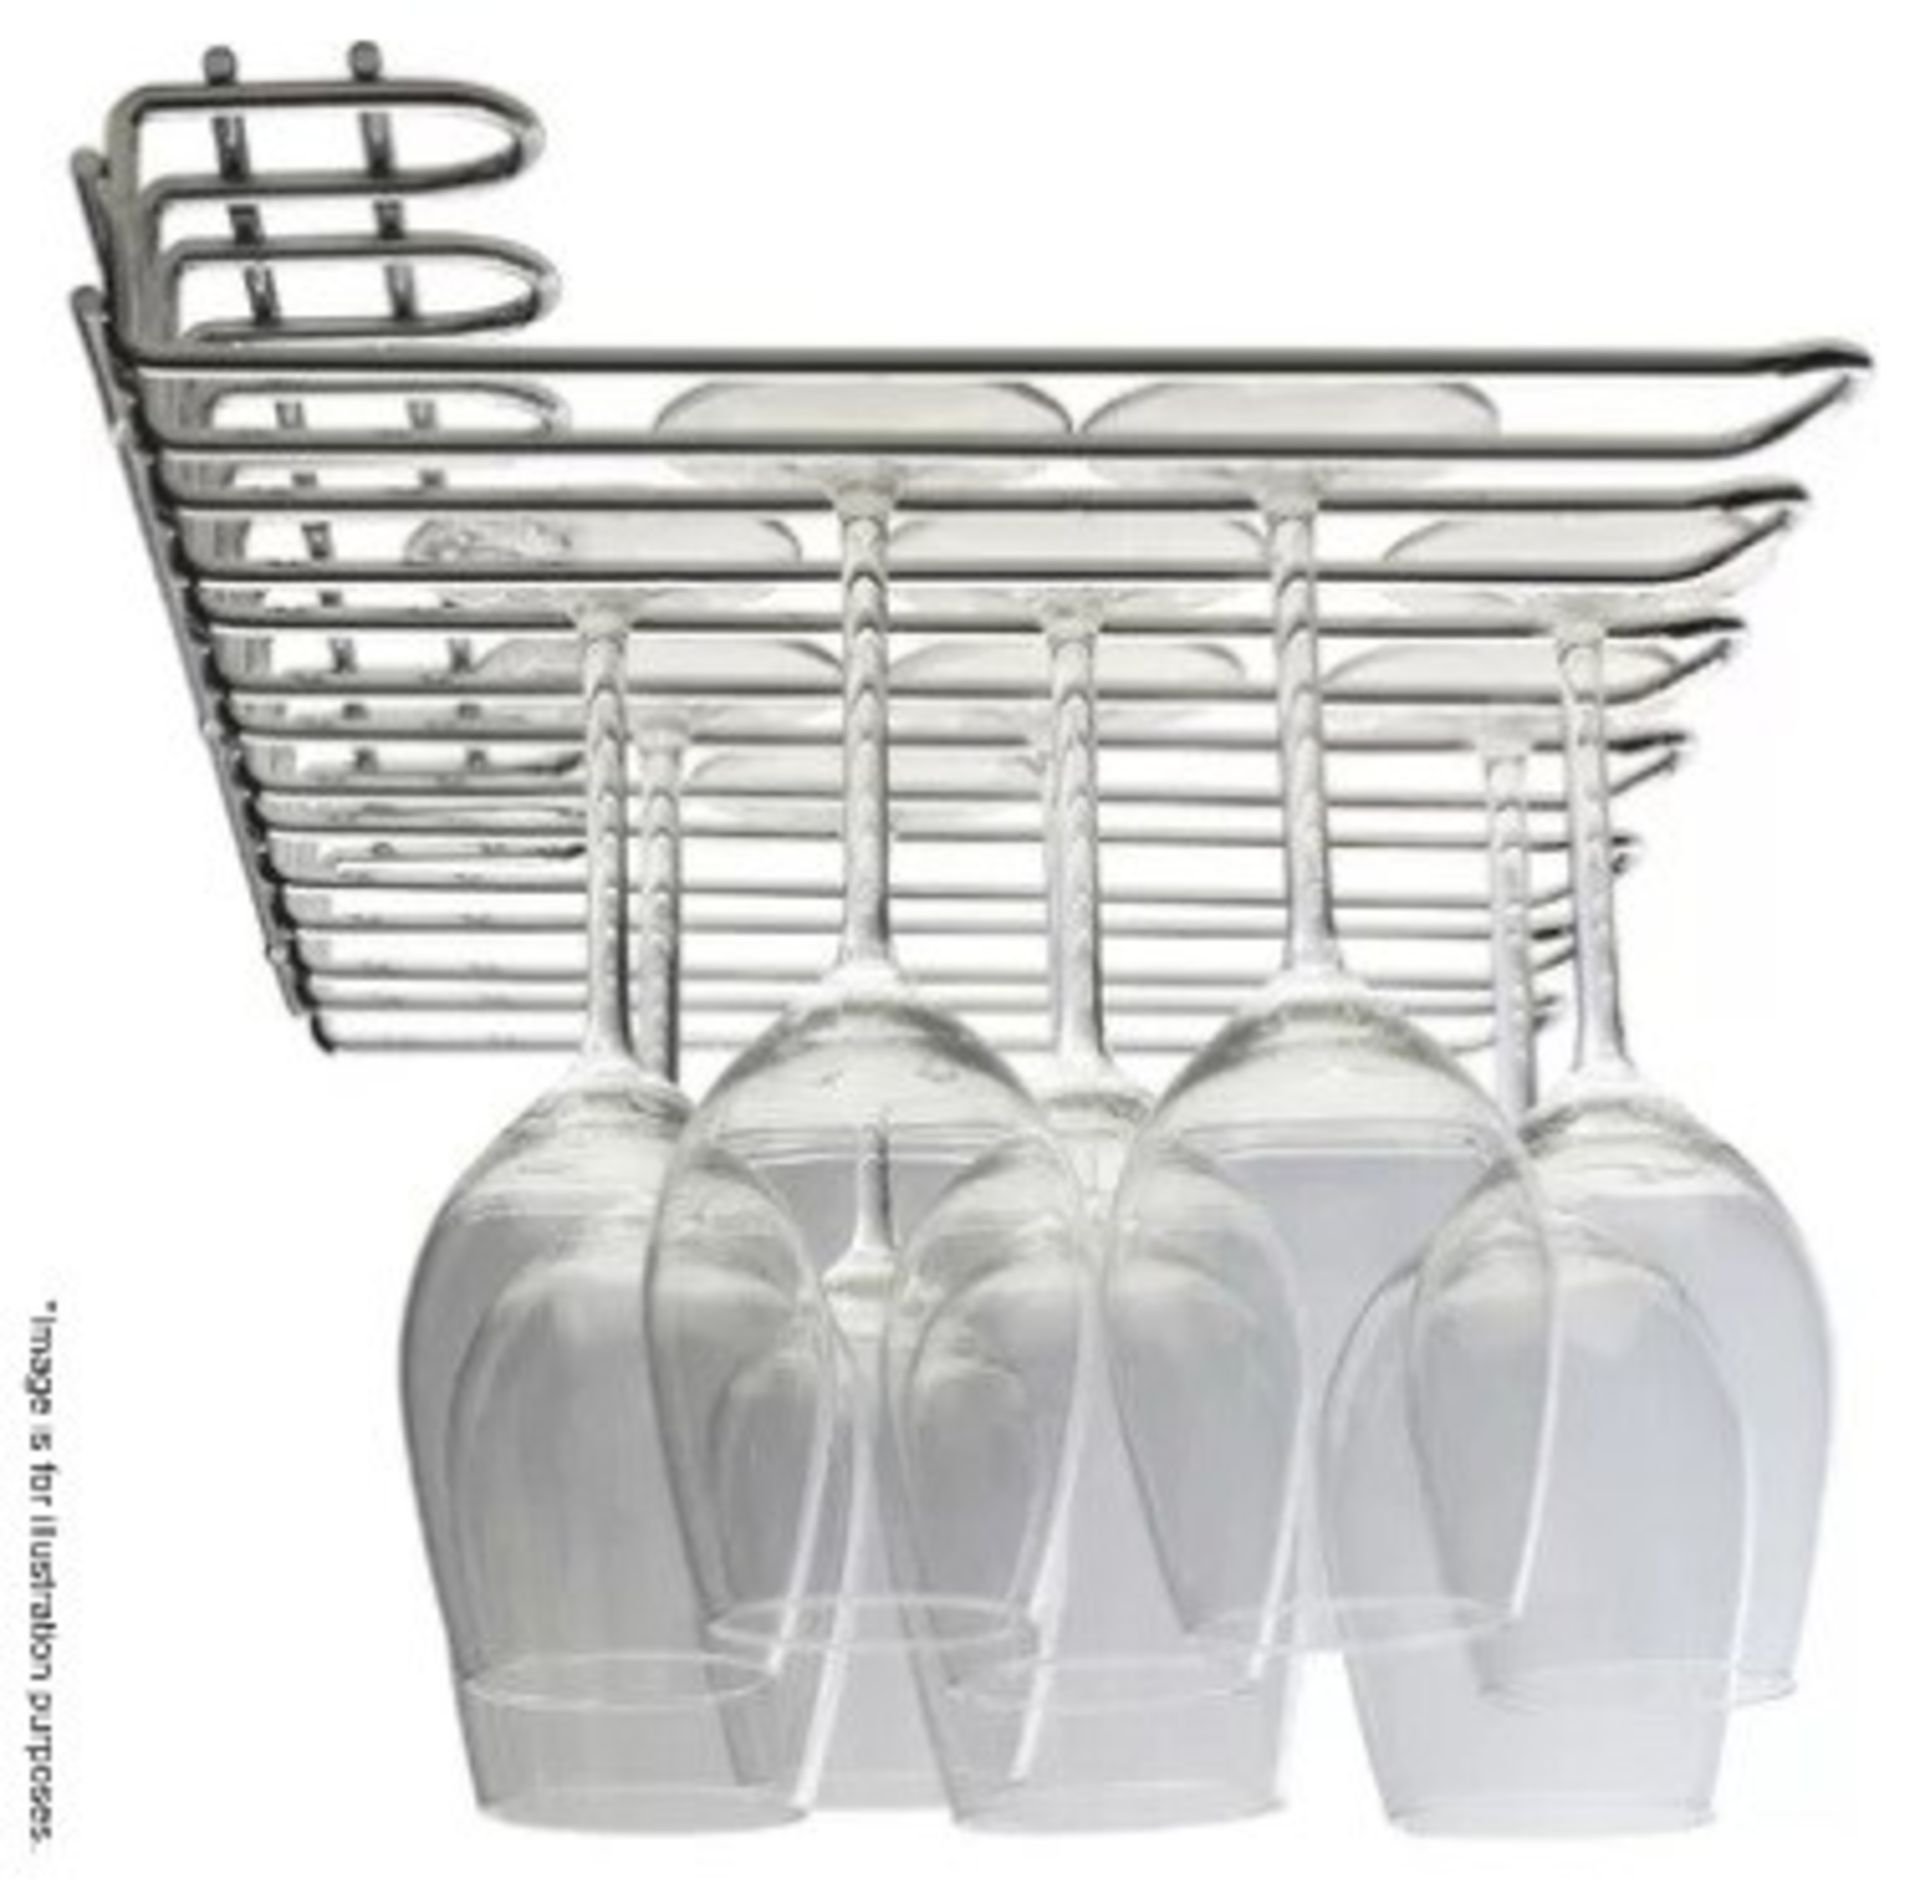 4 x Wall Mounted Wine Glass Racks / Holders - Dimensions: 30 x 54cm - CL392 - Ref LD313 -